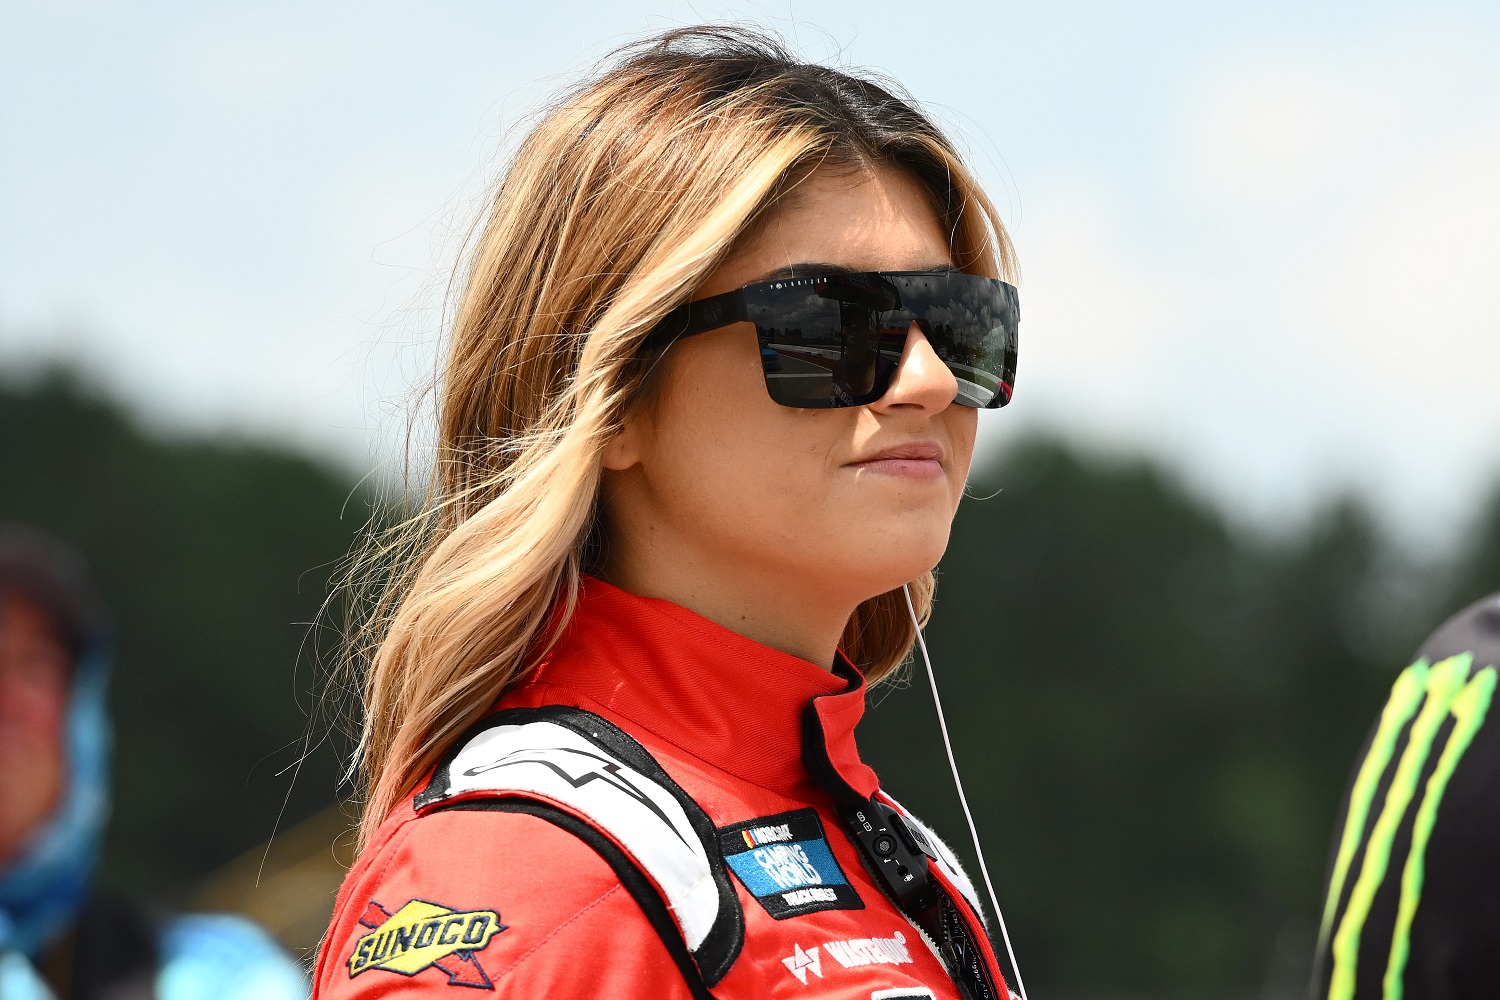 Hailie Deegan waits on the grid prior to the NASCAR Camping World Truck Series O'Reilly Auto Parts 150 at Mid-Ohio Sports Car Course on July 9, 2022. | Ben Jackson/Getty Images